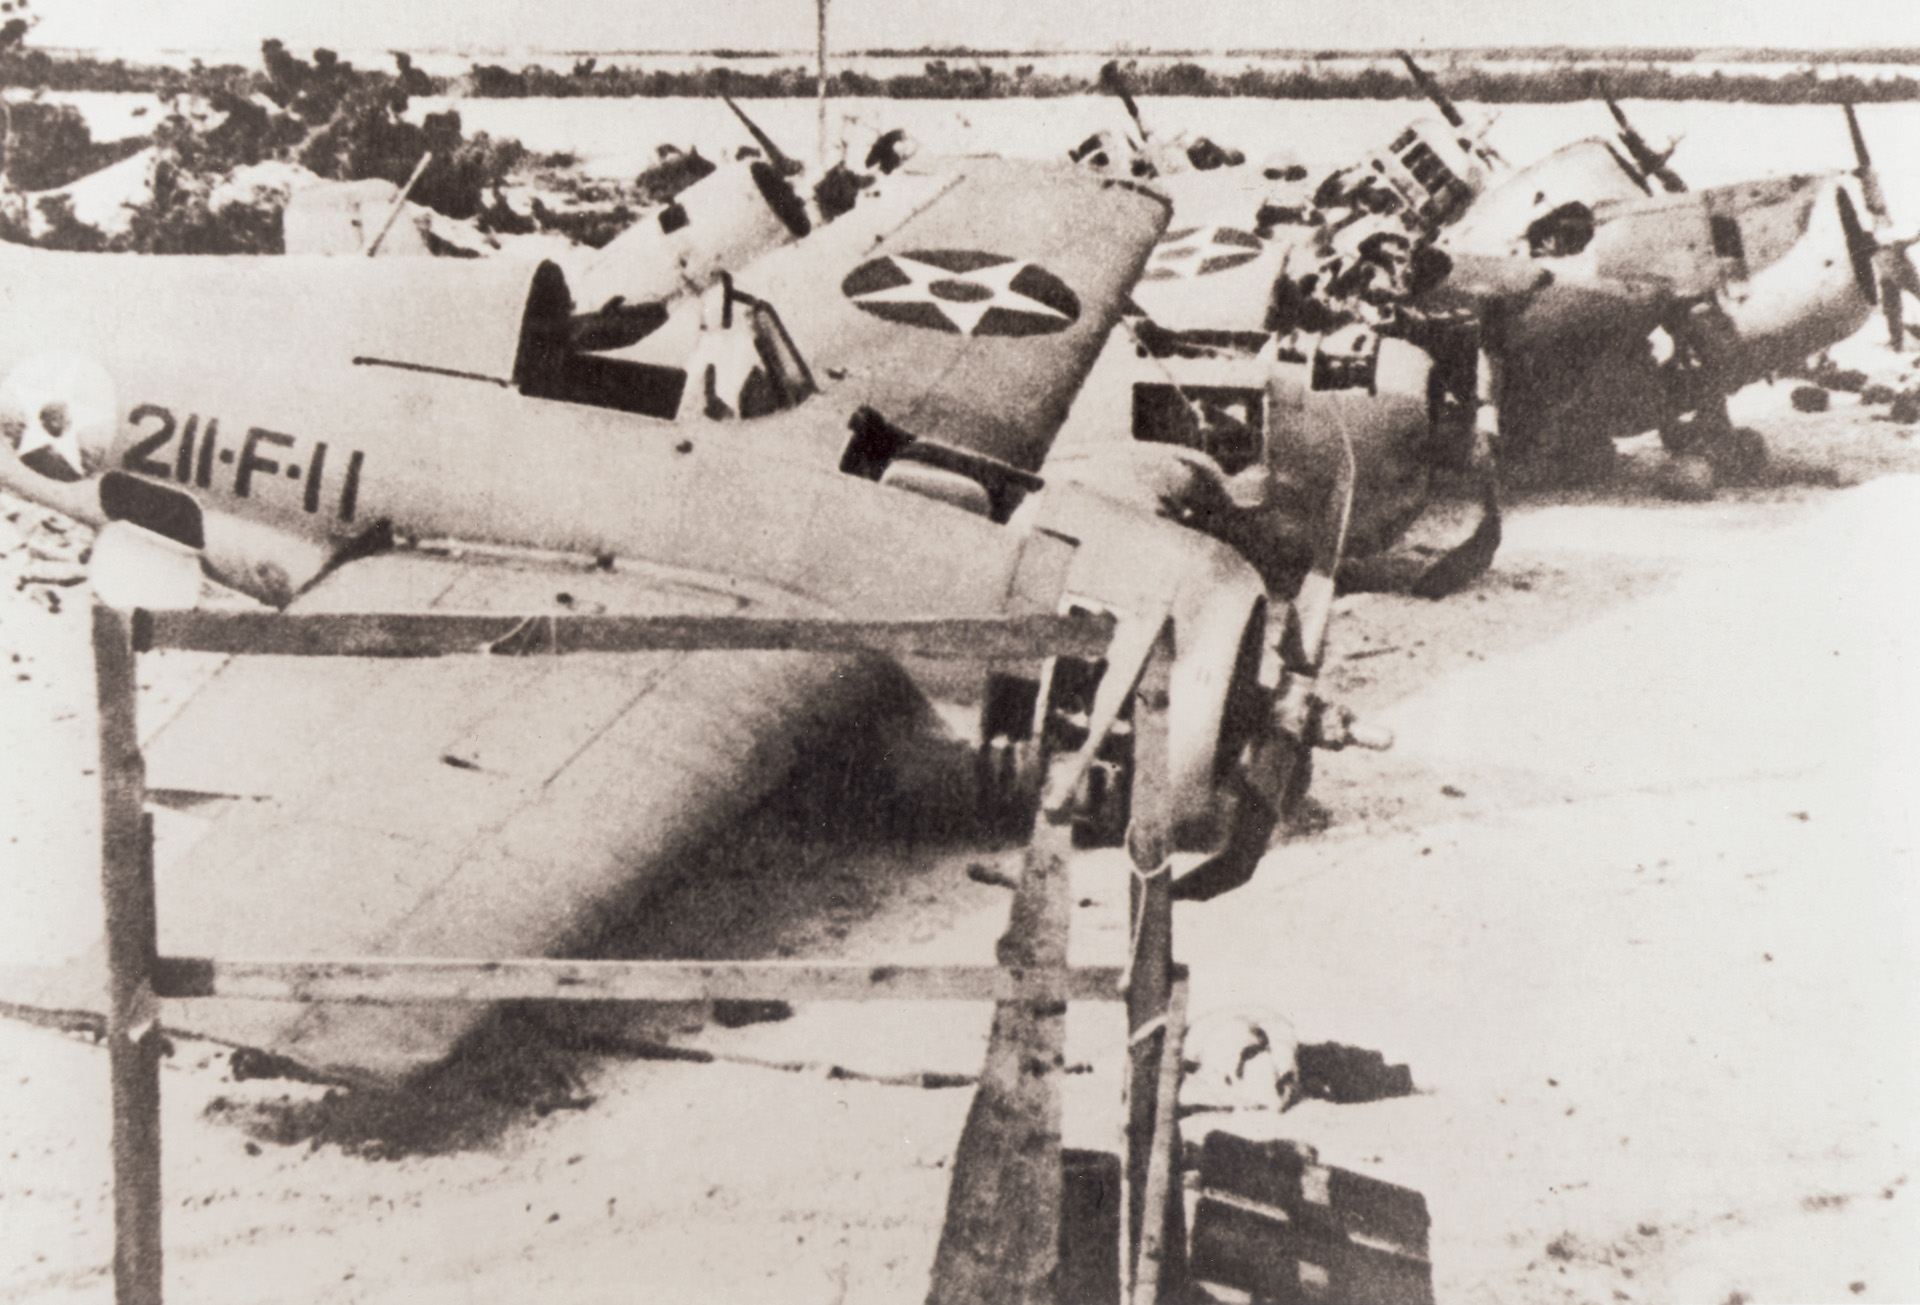 Photographed after Wake Island fell to the Japanese on December 23, 1941, these US. Wildcat fighter planes of Squadron VMF-211 were disabled during the fighting.